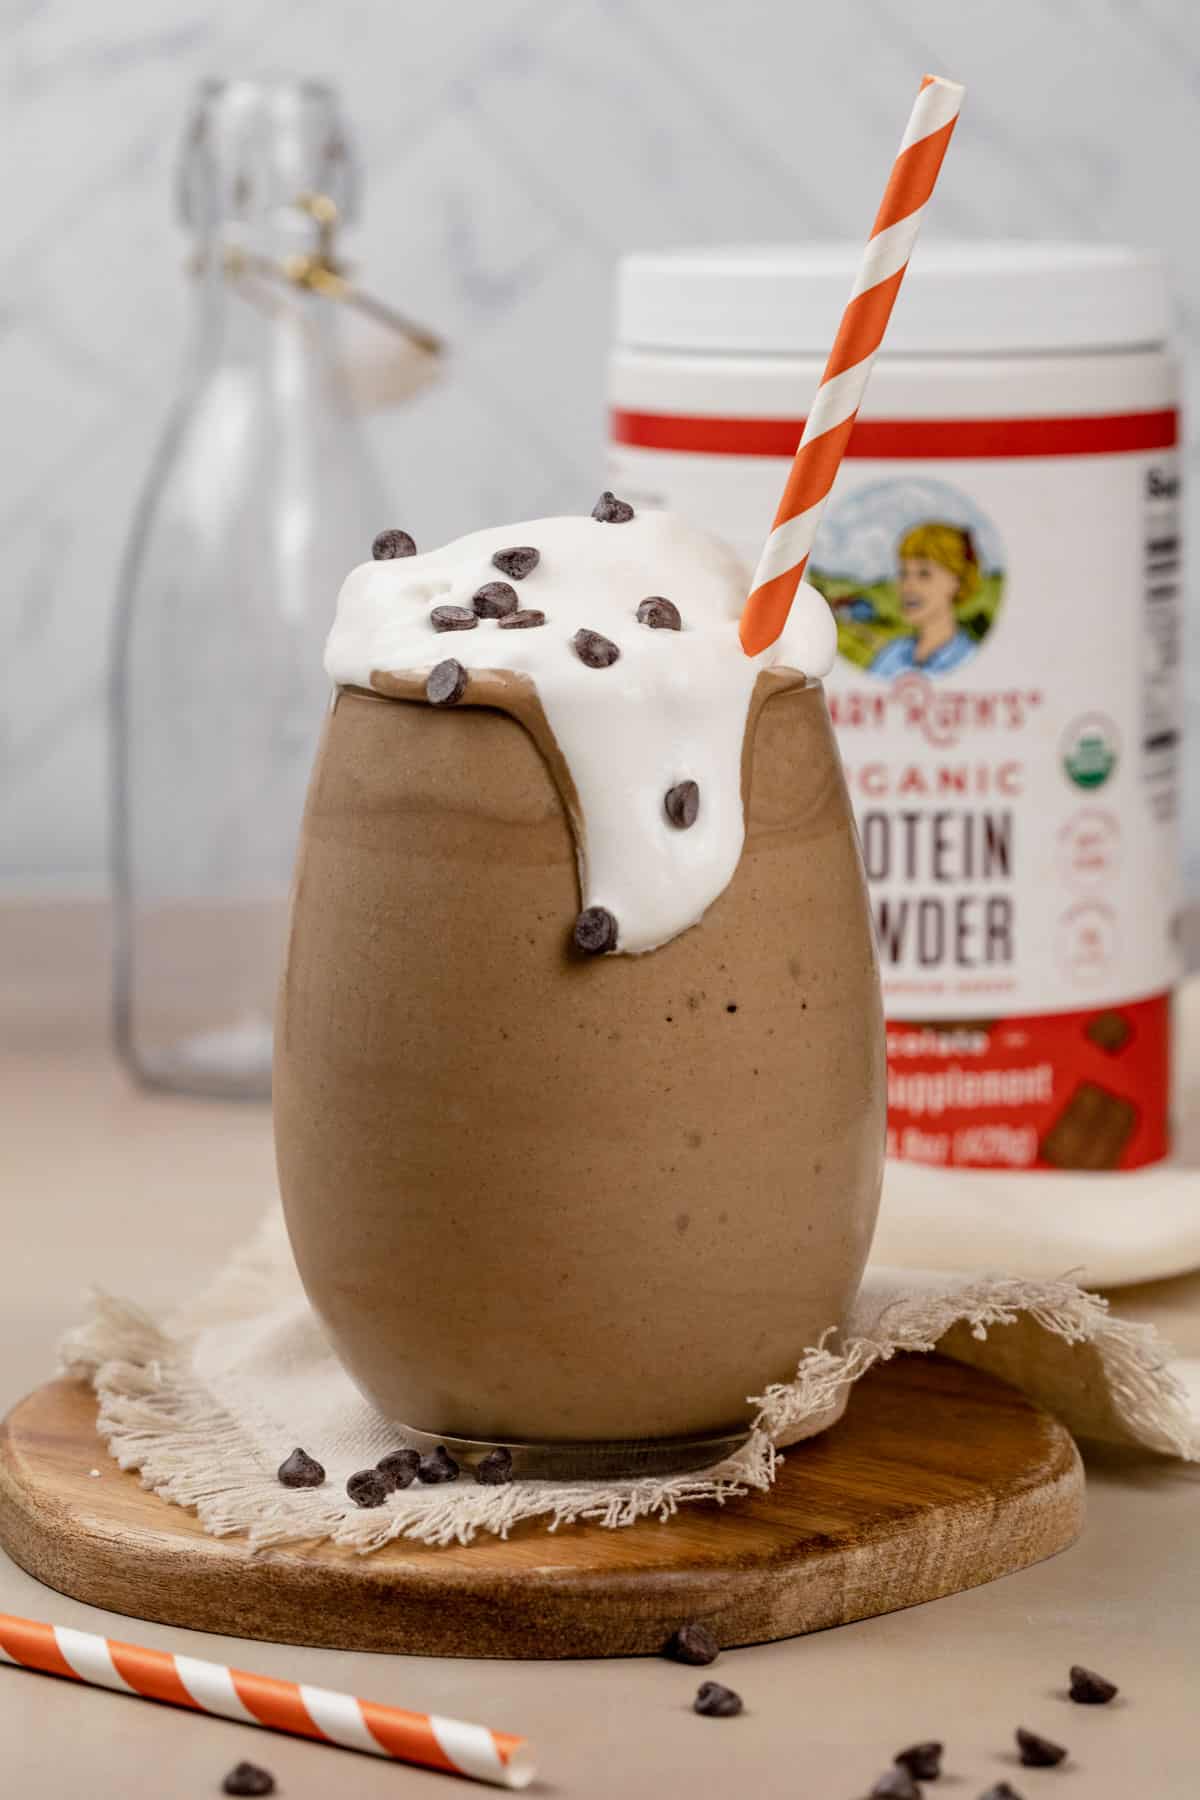 A glass filled with the chocolate protein shake and with a dollop of whipped cream on top that is artfully overflowing in the glass. Tiny chocolate chips are sprinkled on top. A white and orange stripe straw is in the glass.